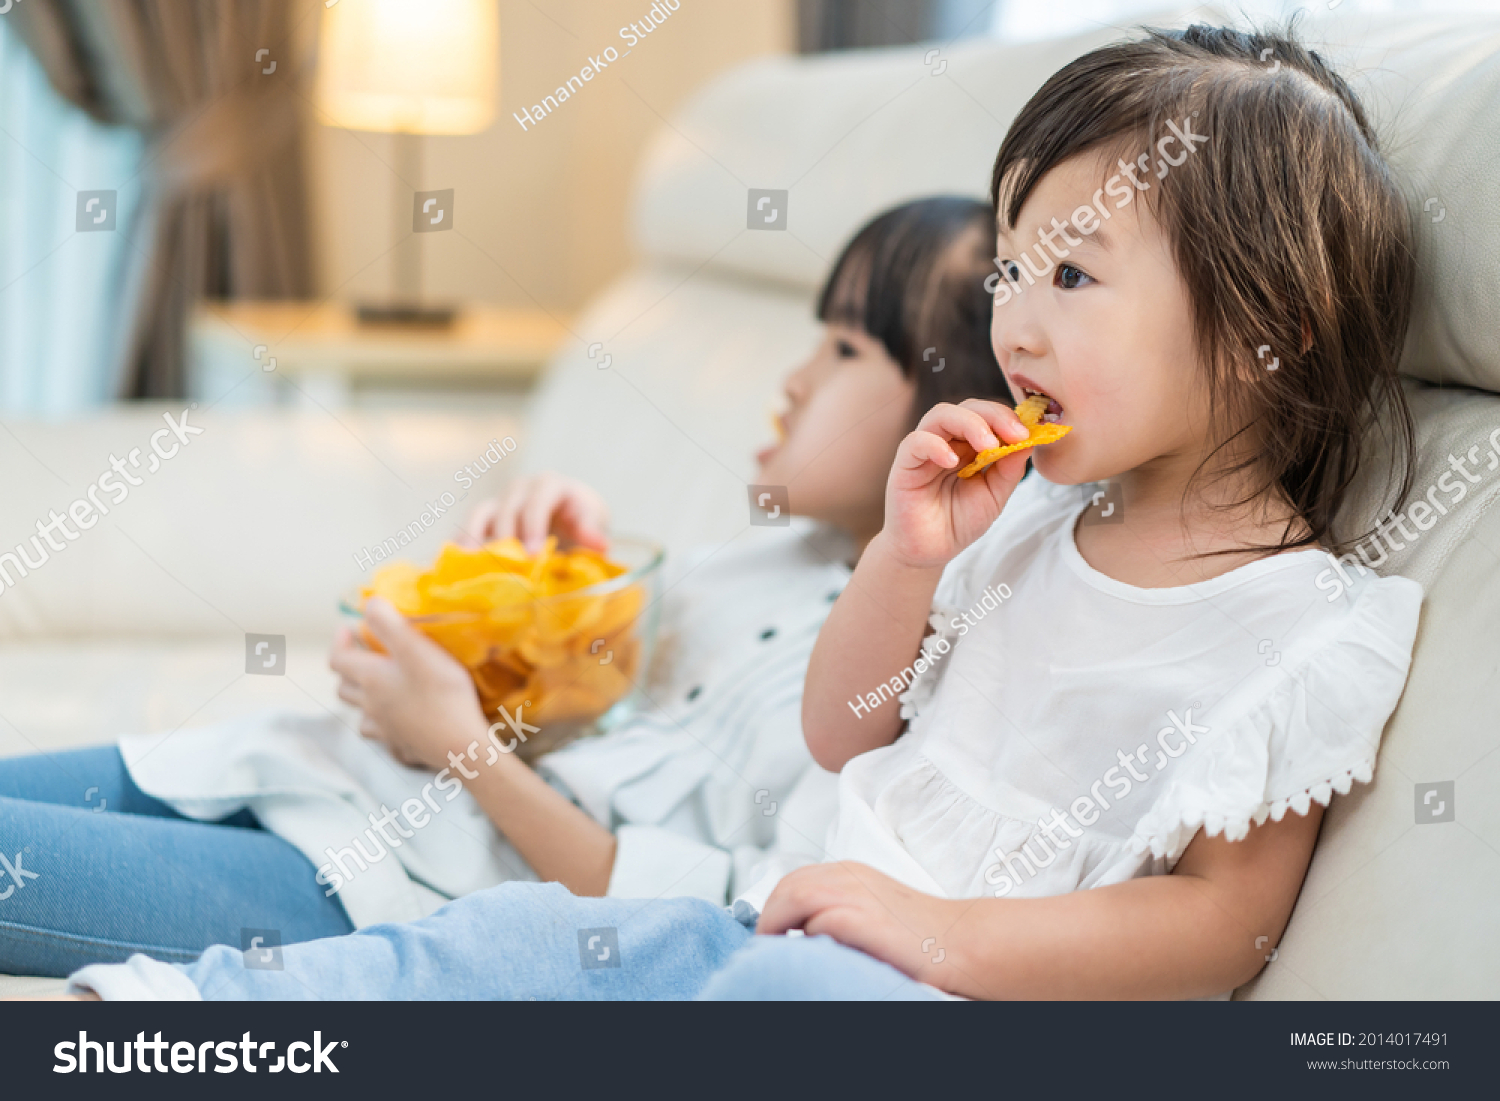 Asian Hungry little girl sibling sisters Puts snack in mouth with hand. Two sweet preschool kid resting on sofa at home enjoy eat fast food, potato chips. Tasty and unhealthy food for children concept #2014017491